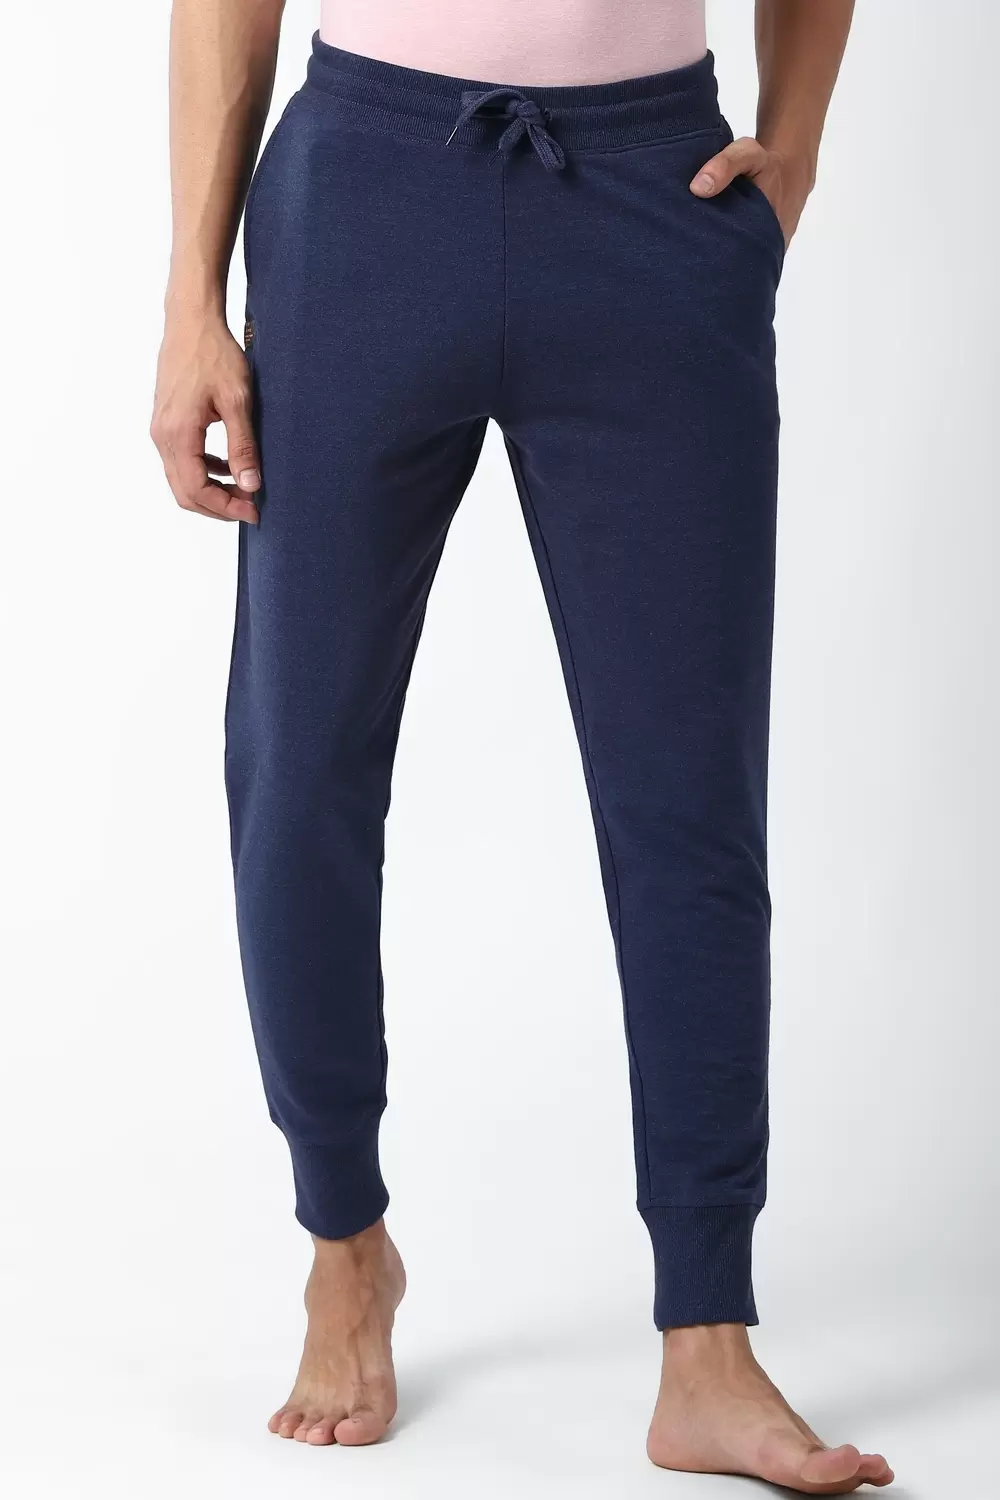 Peter England Men Navy Solid Casual Track Pants